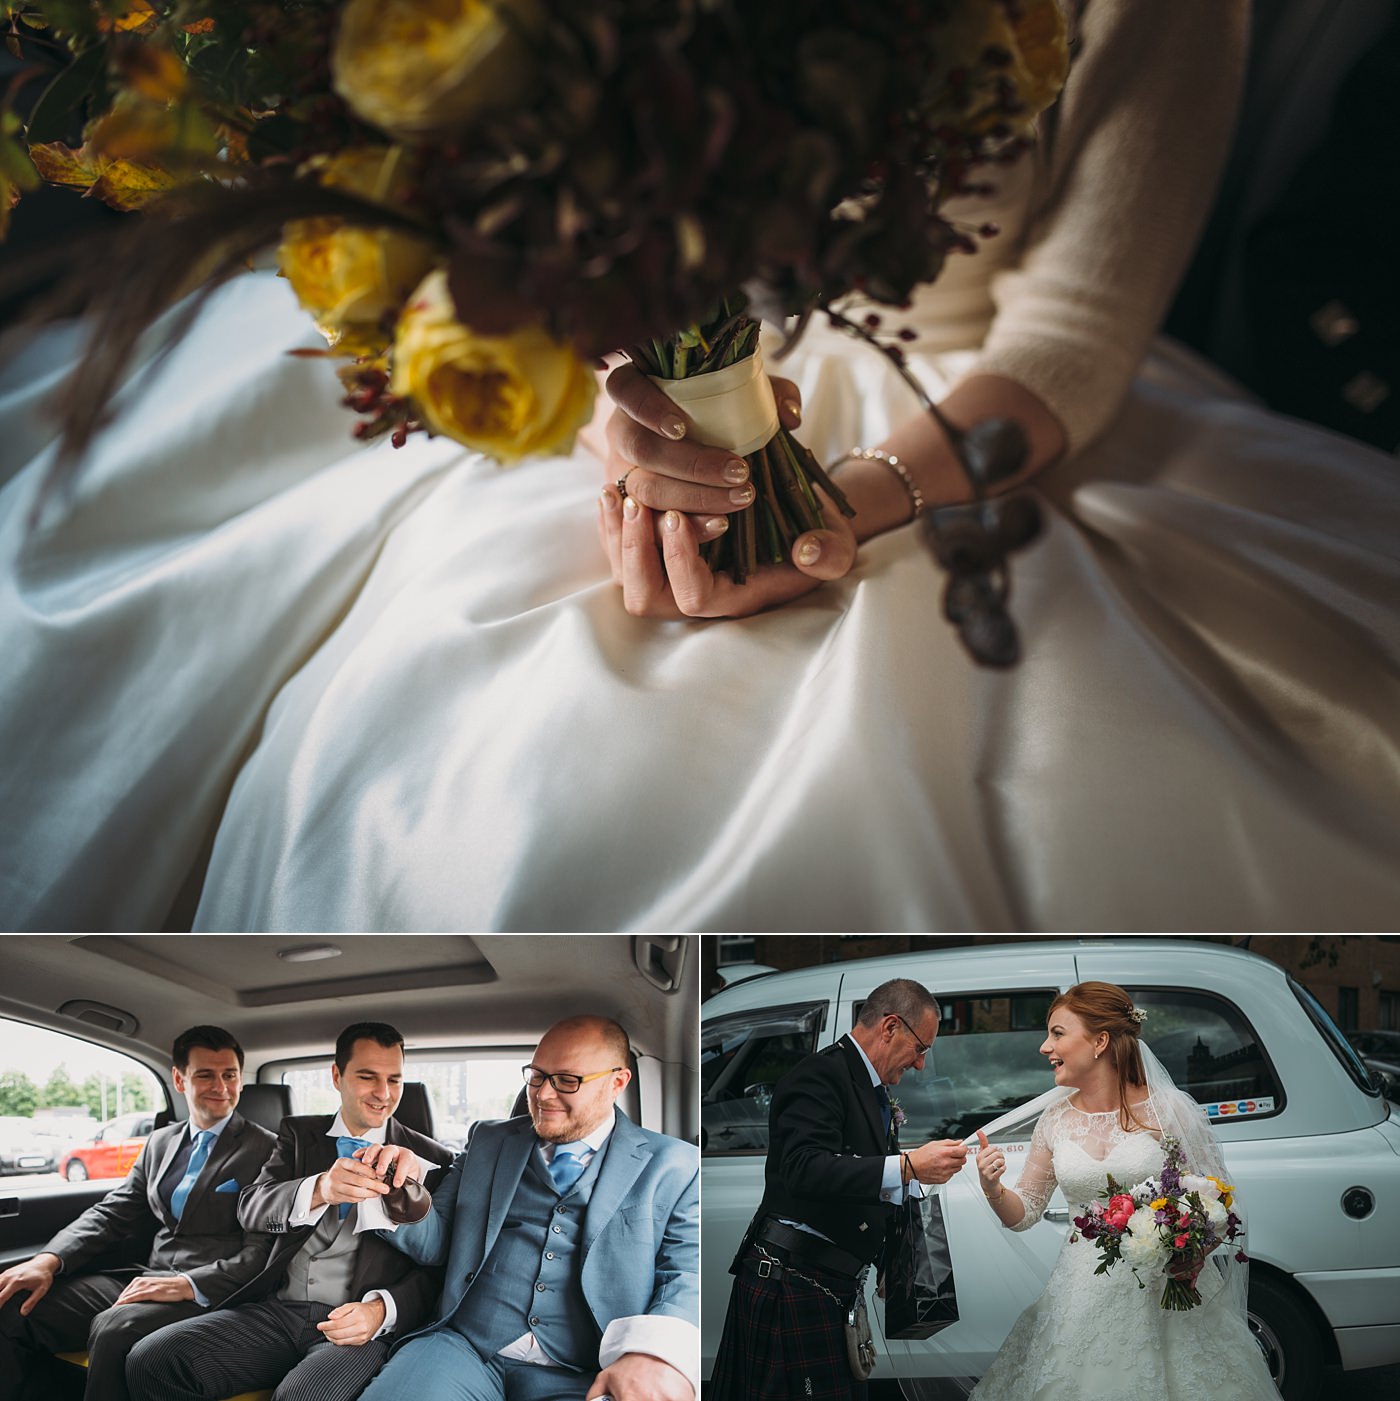 ceremony timeline - arriving by taxi to your wedding